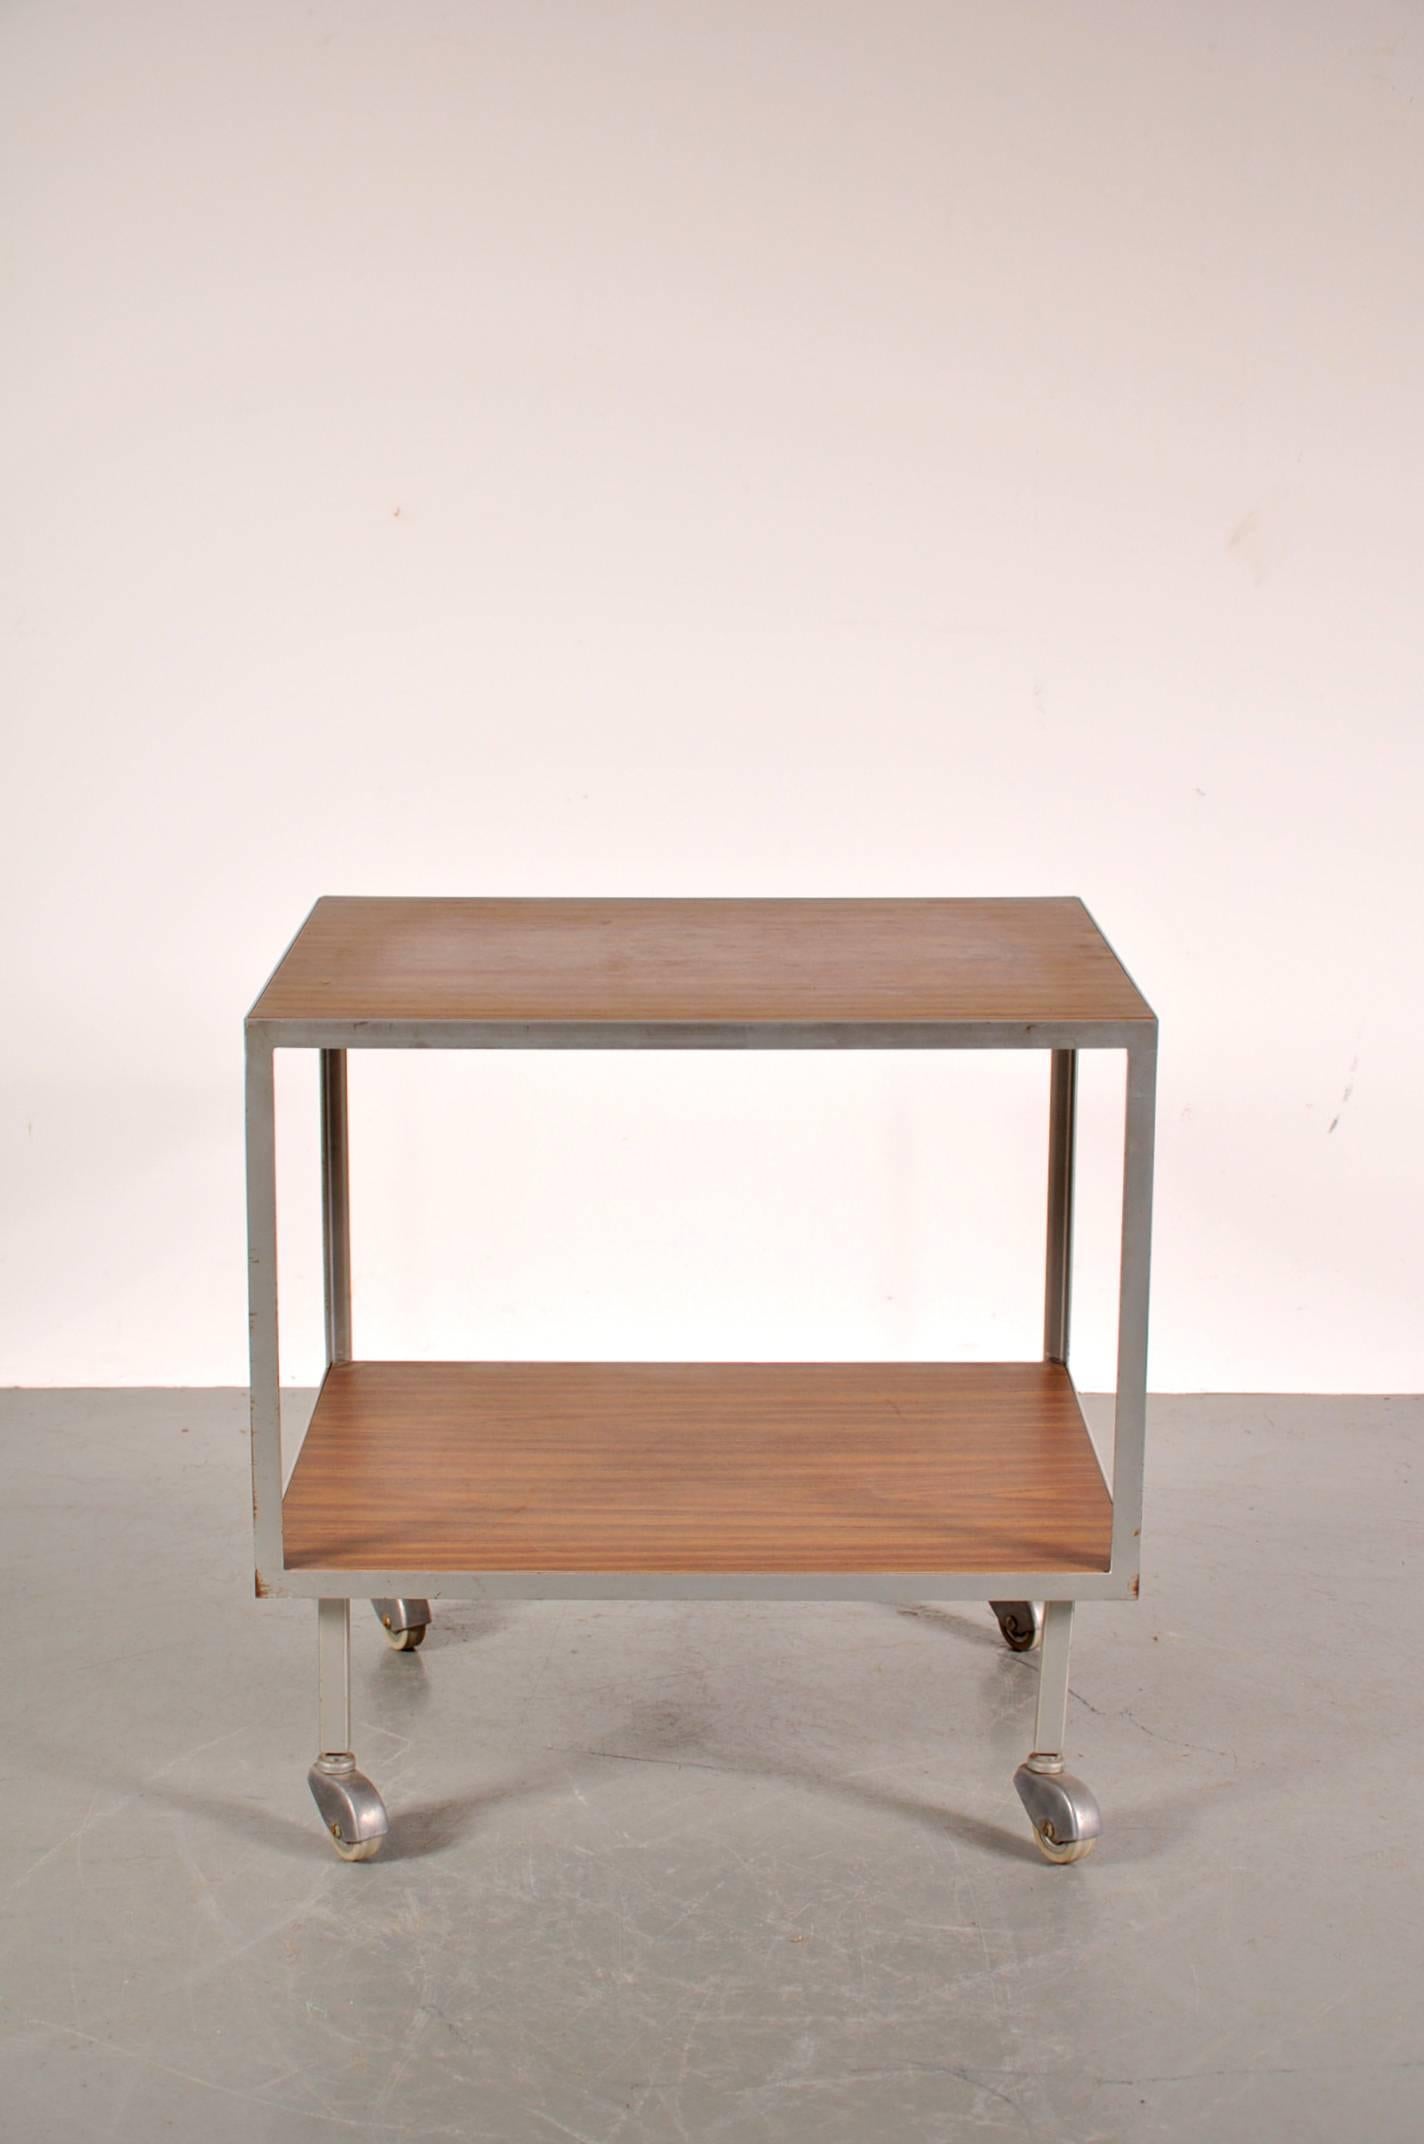 Beautiful trolley designed by George Nelson, manufactured by Herman Miller in the USA, circa 1960.

This very well-crafted piece has a nice grey metal base with two beautiful walnut wooden tops, giving it a luxorious appearance that would make a